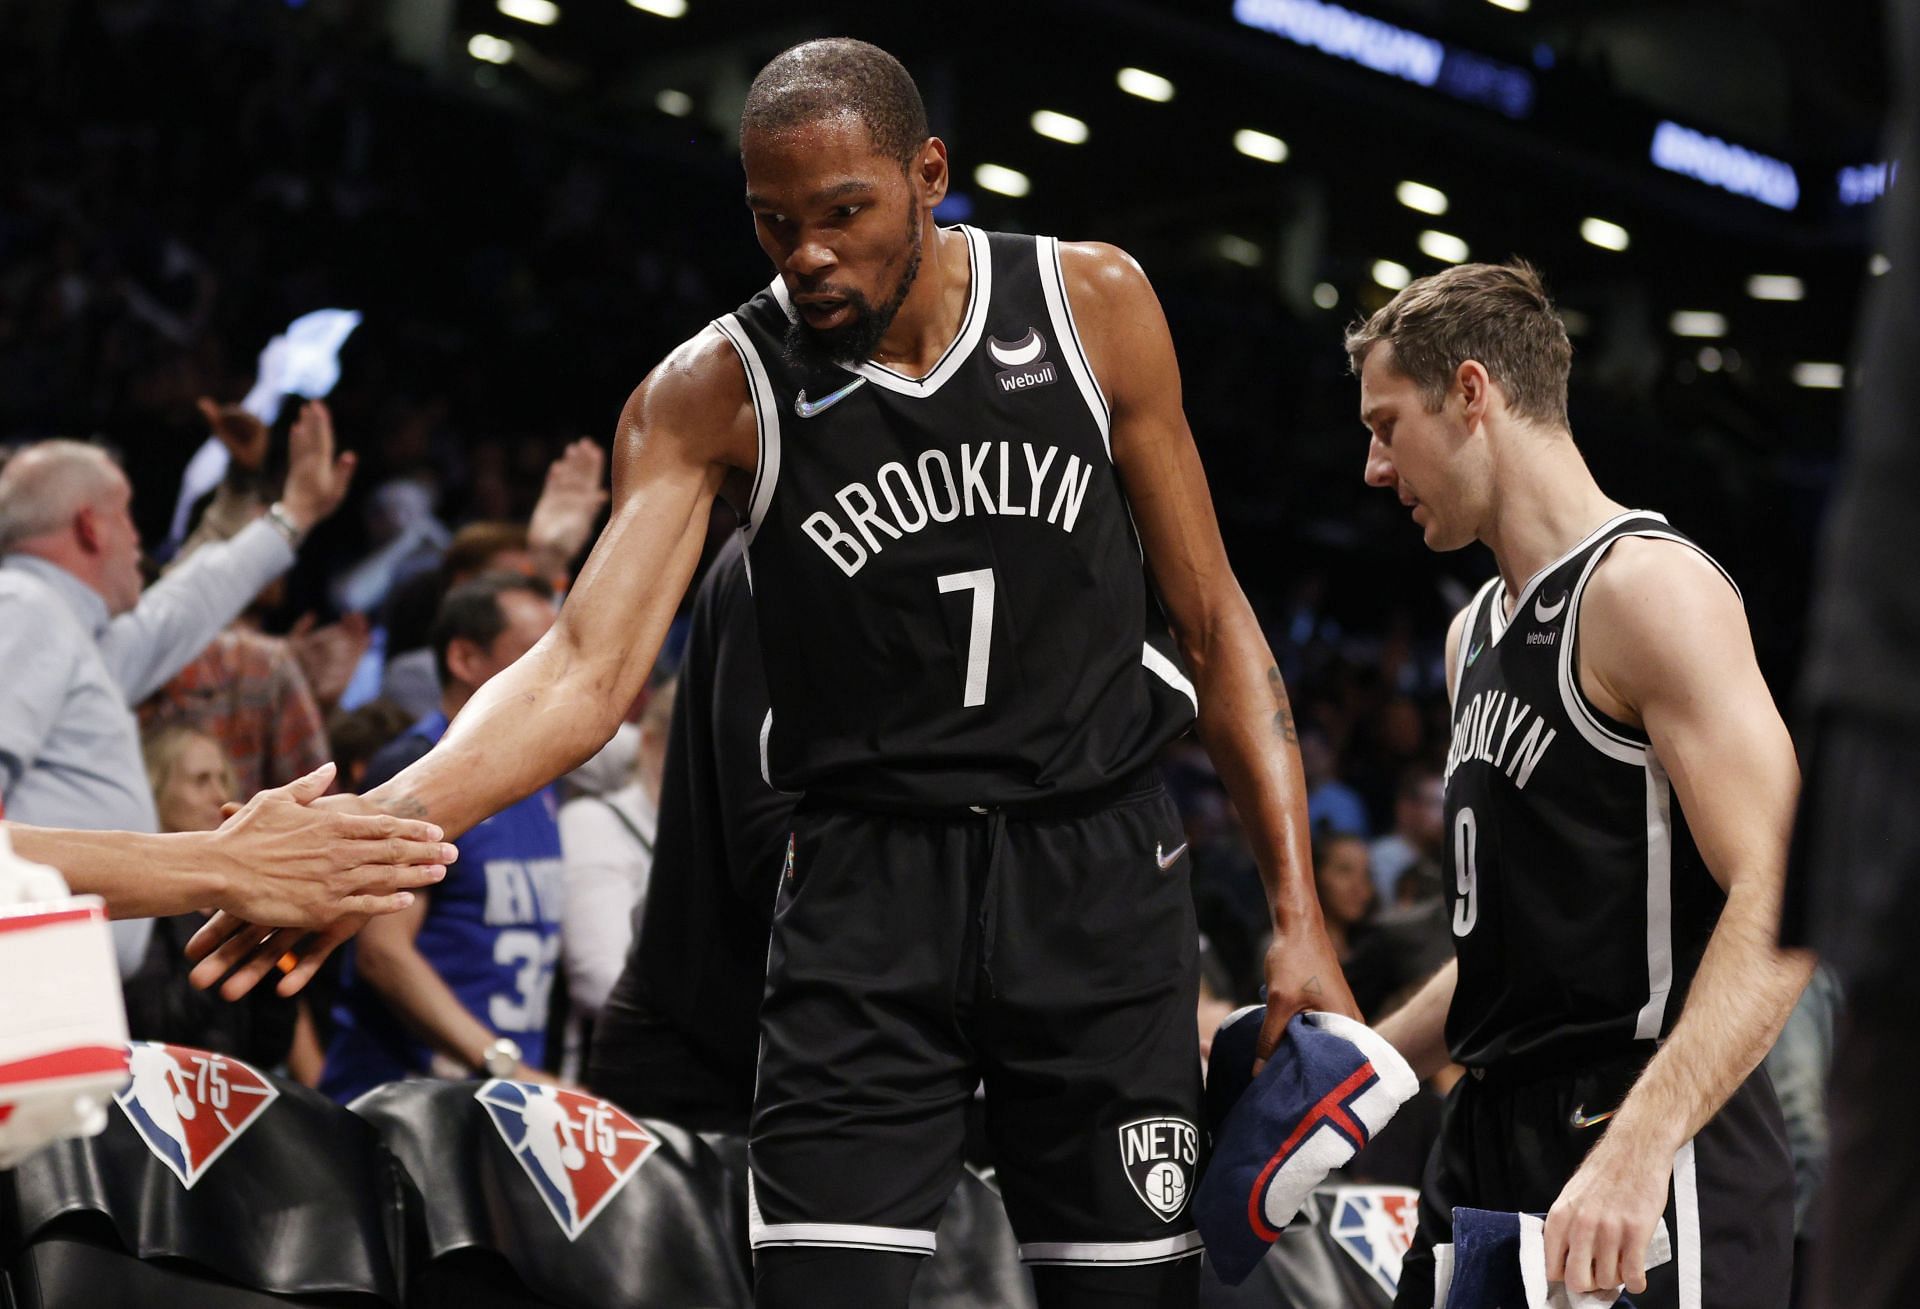 Kevin Durant of the Brooklyn Nets high-fives a teammate